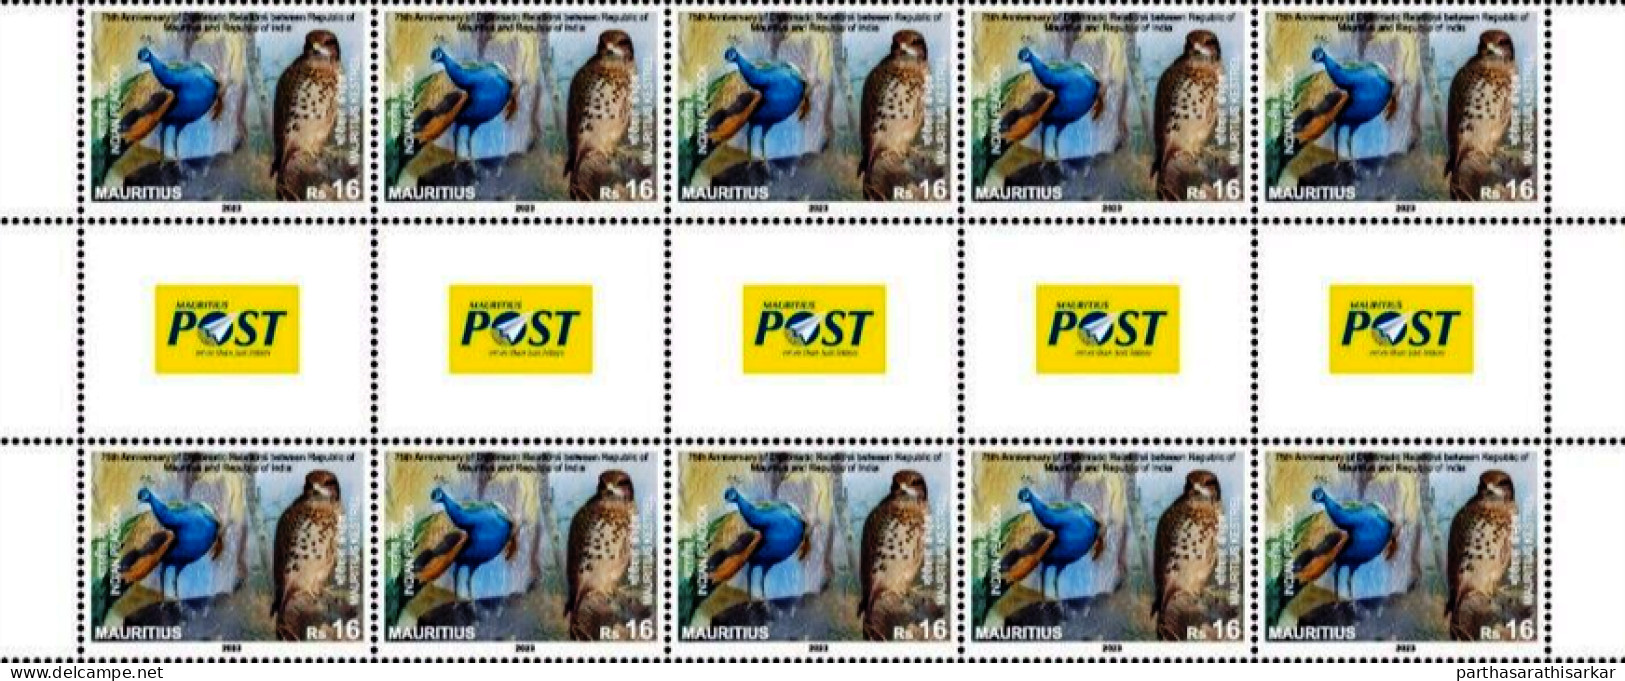 MAURITIUS 2023 JOINT ISSUE 75TH ANNIV OF DIPLOMATIC RELATIONS BETWEEN INDIA MAURITIUS BIRDS GUTTER PAIR OF 10 STAMPS MNH - Emissioni Congiunte